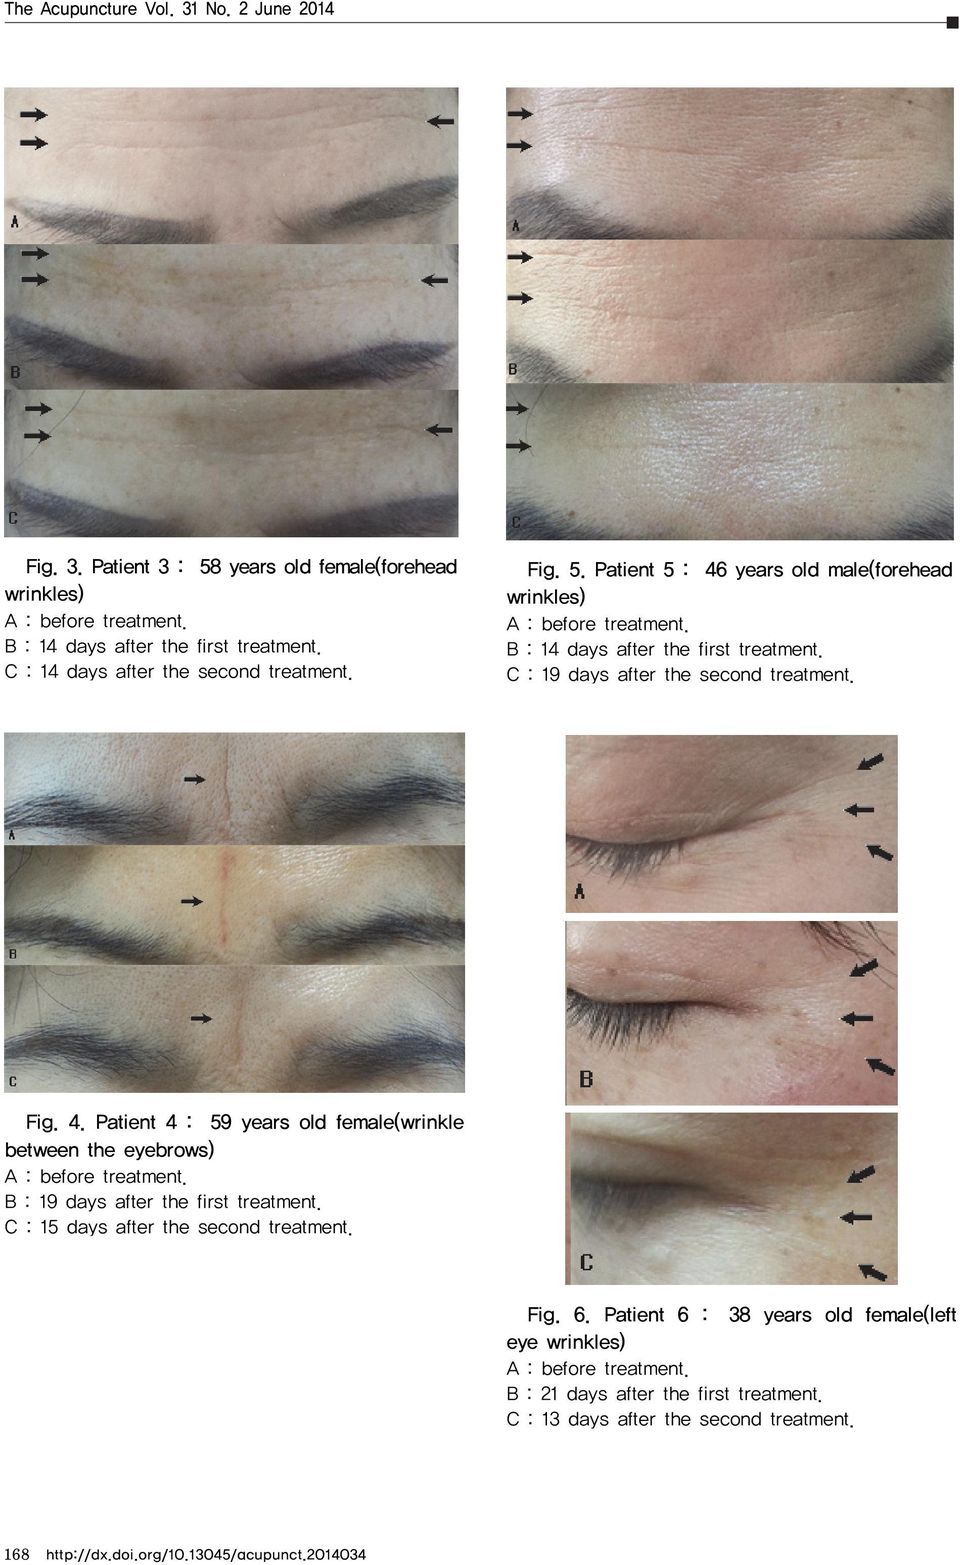 Patient 5 : 46 years old male(forehead C : 19 days after the second treatment. Fig. 4. Patient 4 : 59 years old female(wrinkle between the eyebrows) B : 19 days after the first treatment.